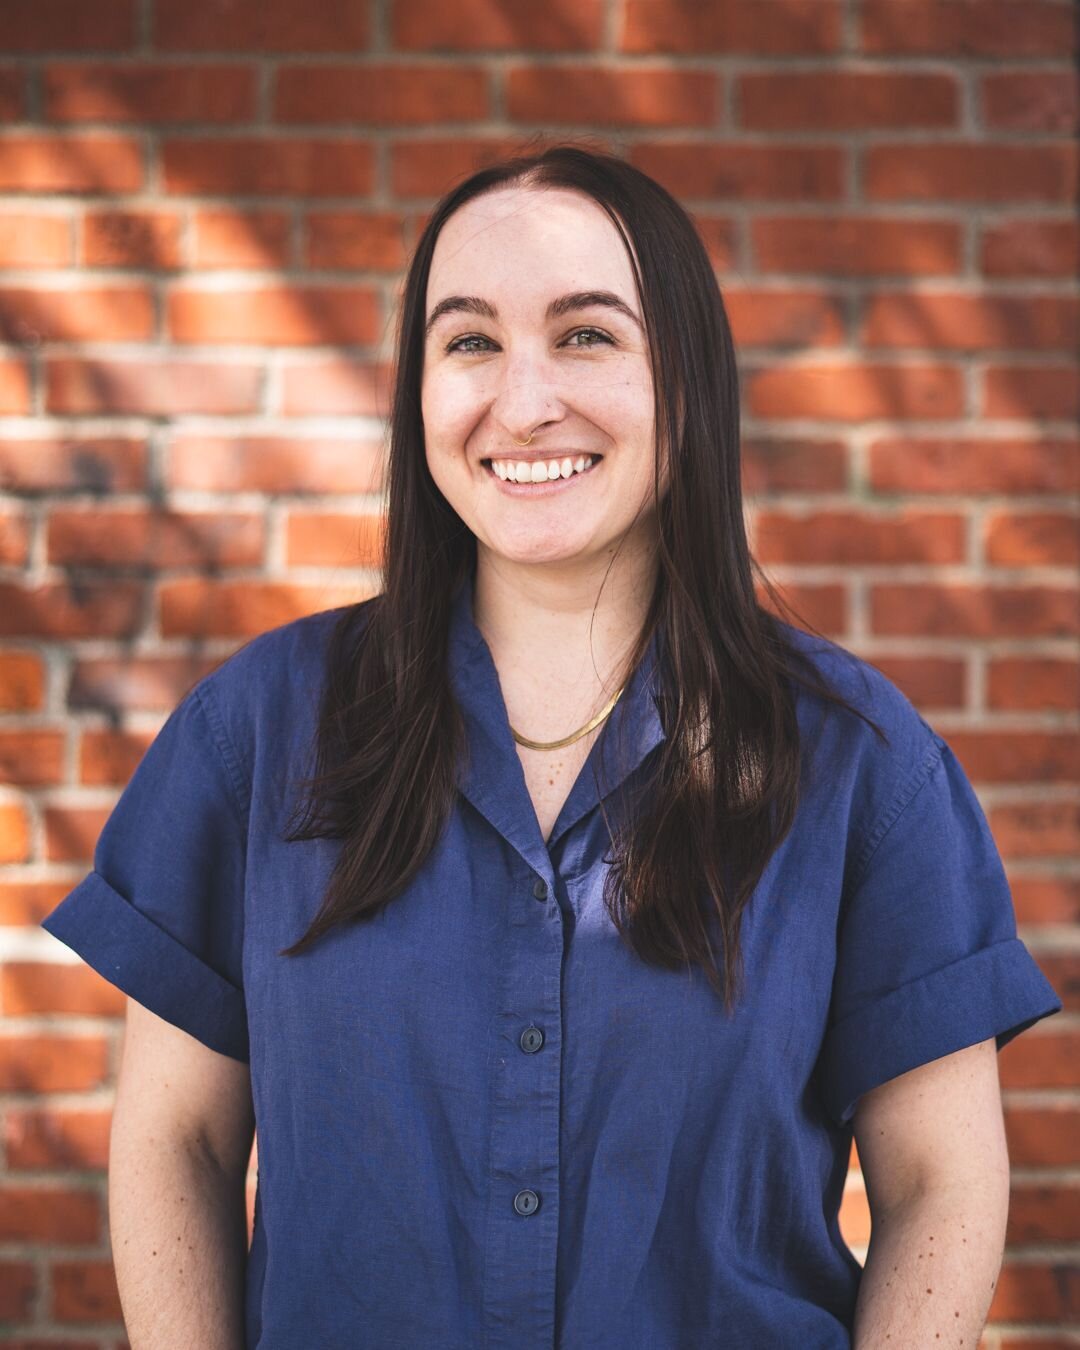 Everyone say hi to Michele! 👋 Michele is our Service Manager over at @shalomyallpdx! Michele has been with us for about a year now and originally hails from Santa Barbara, CA. Michele has been working in restaurants for nearly a decade and got start